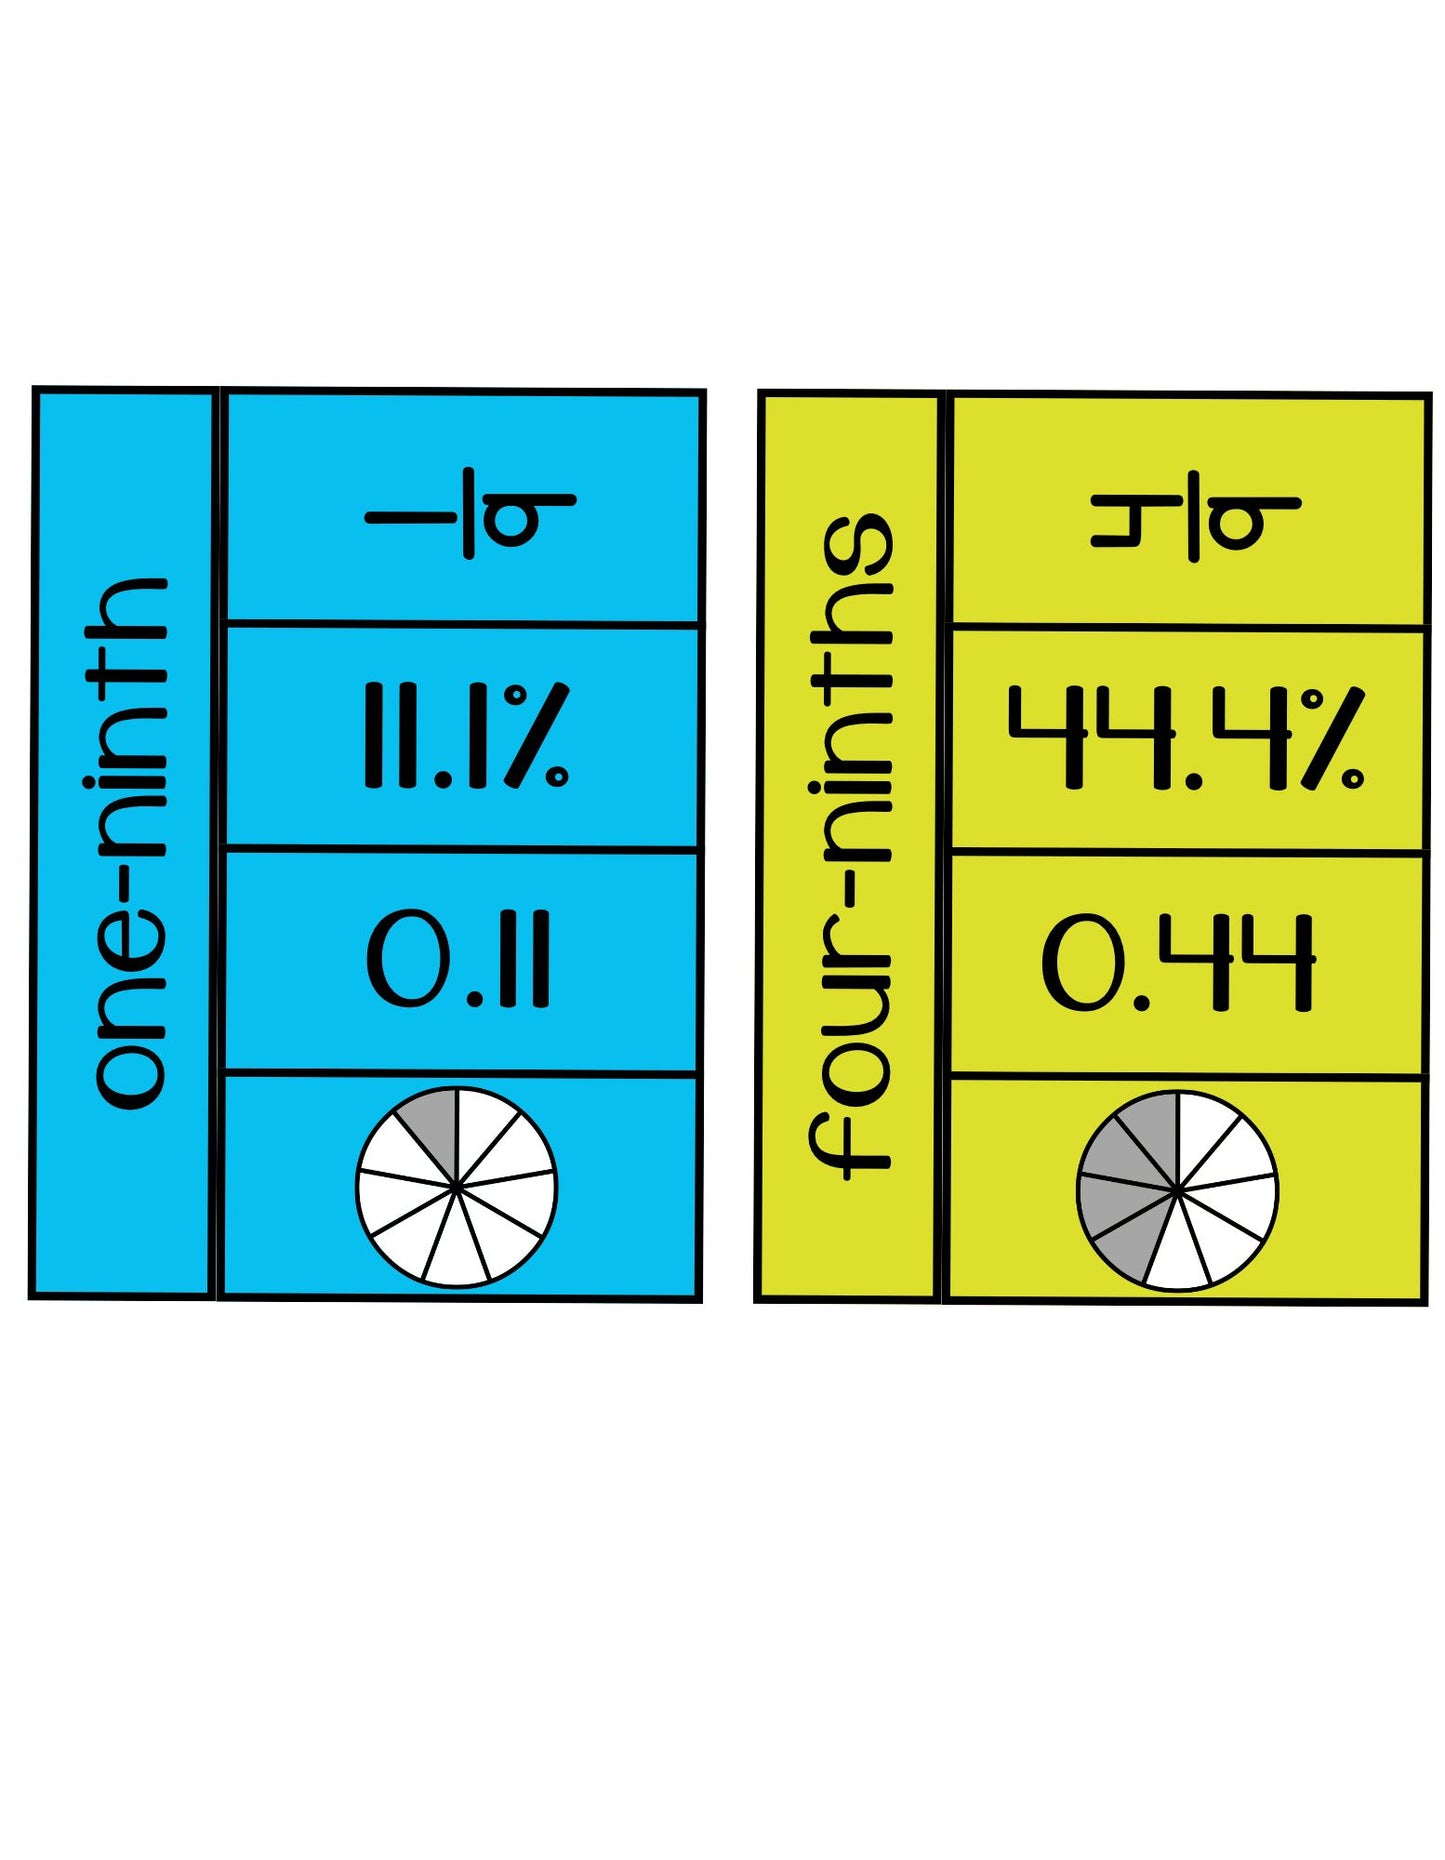 Converting Fractions Math Puzzles - PHYSICAL & DIGITAL VERSION